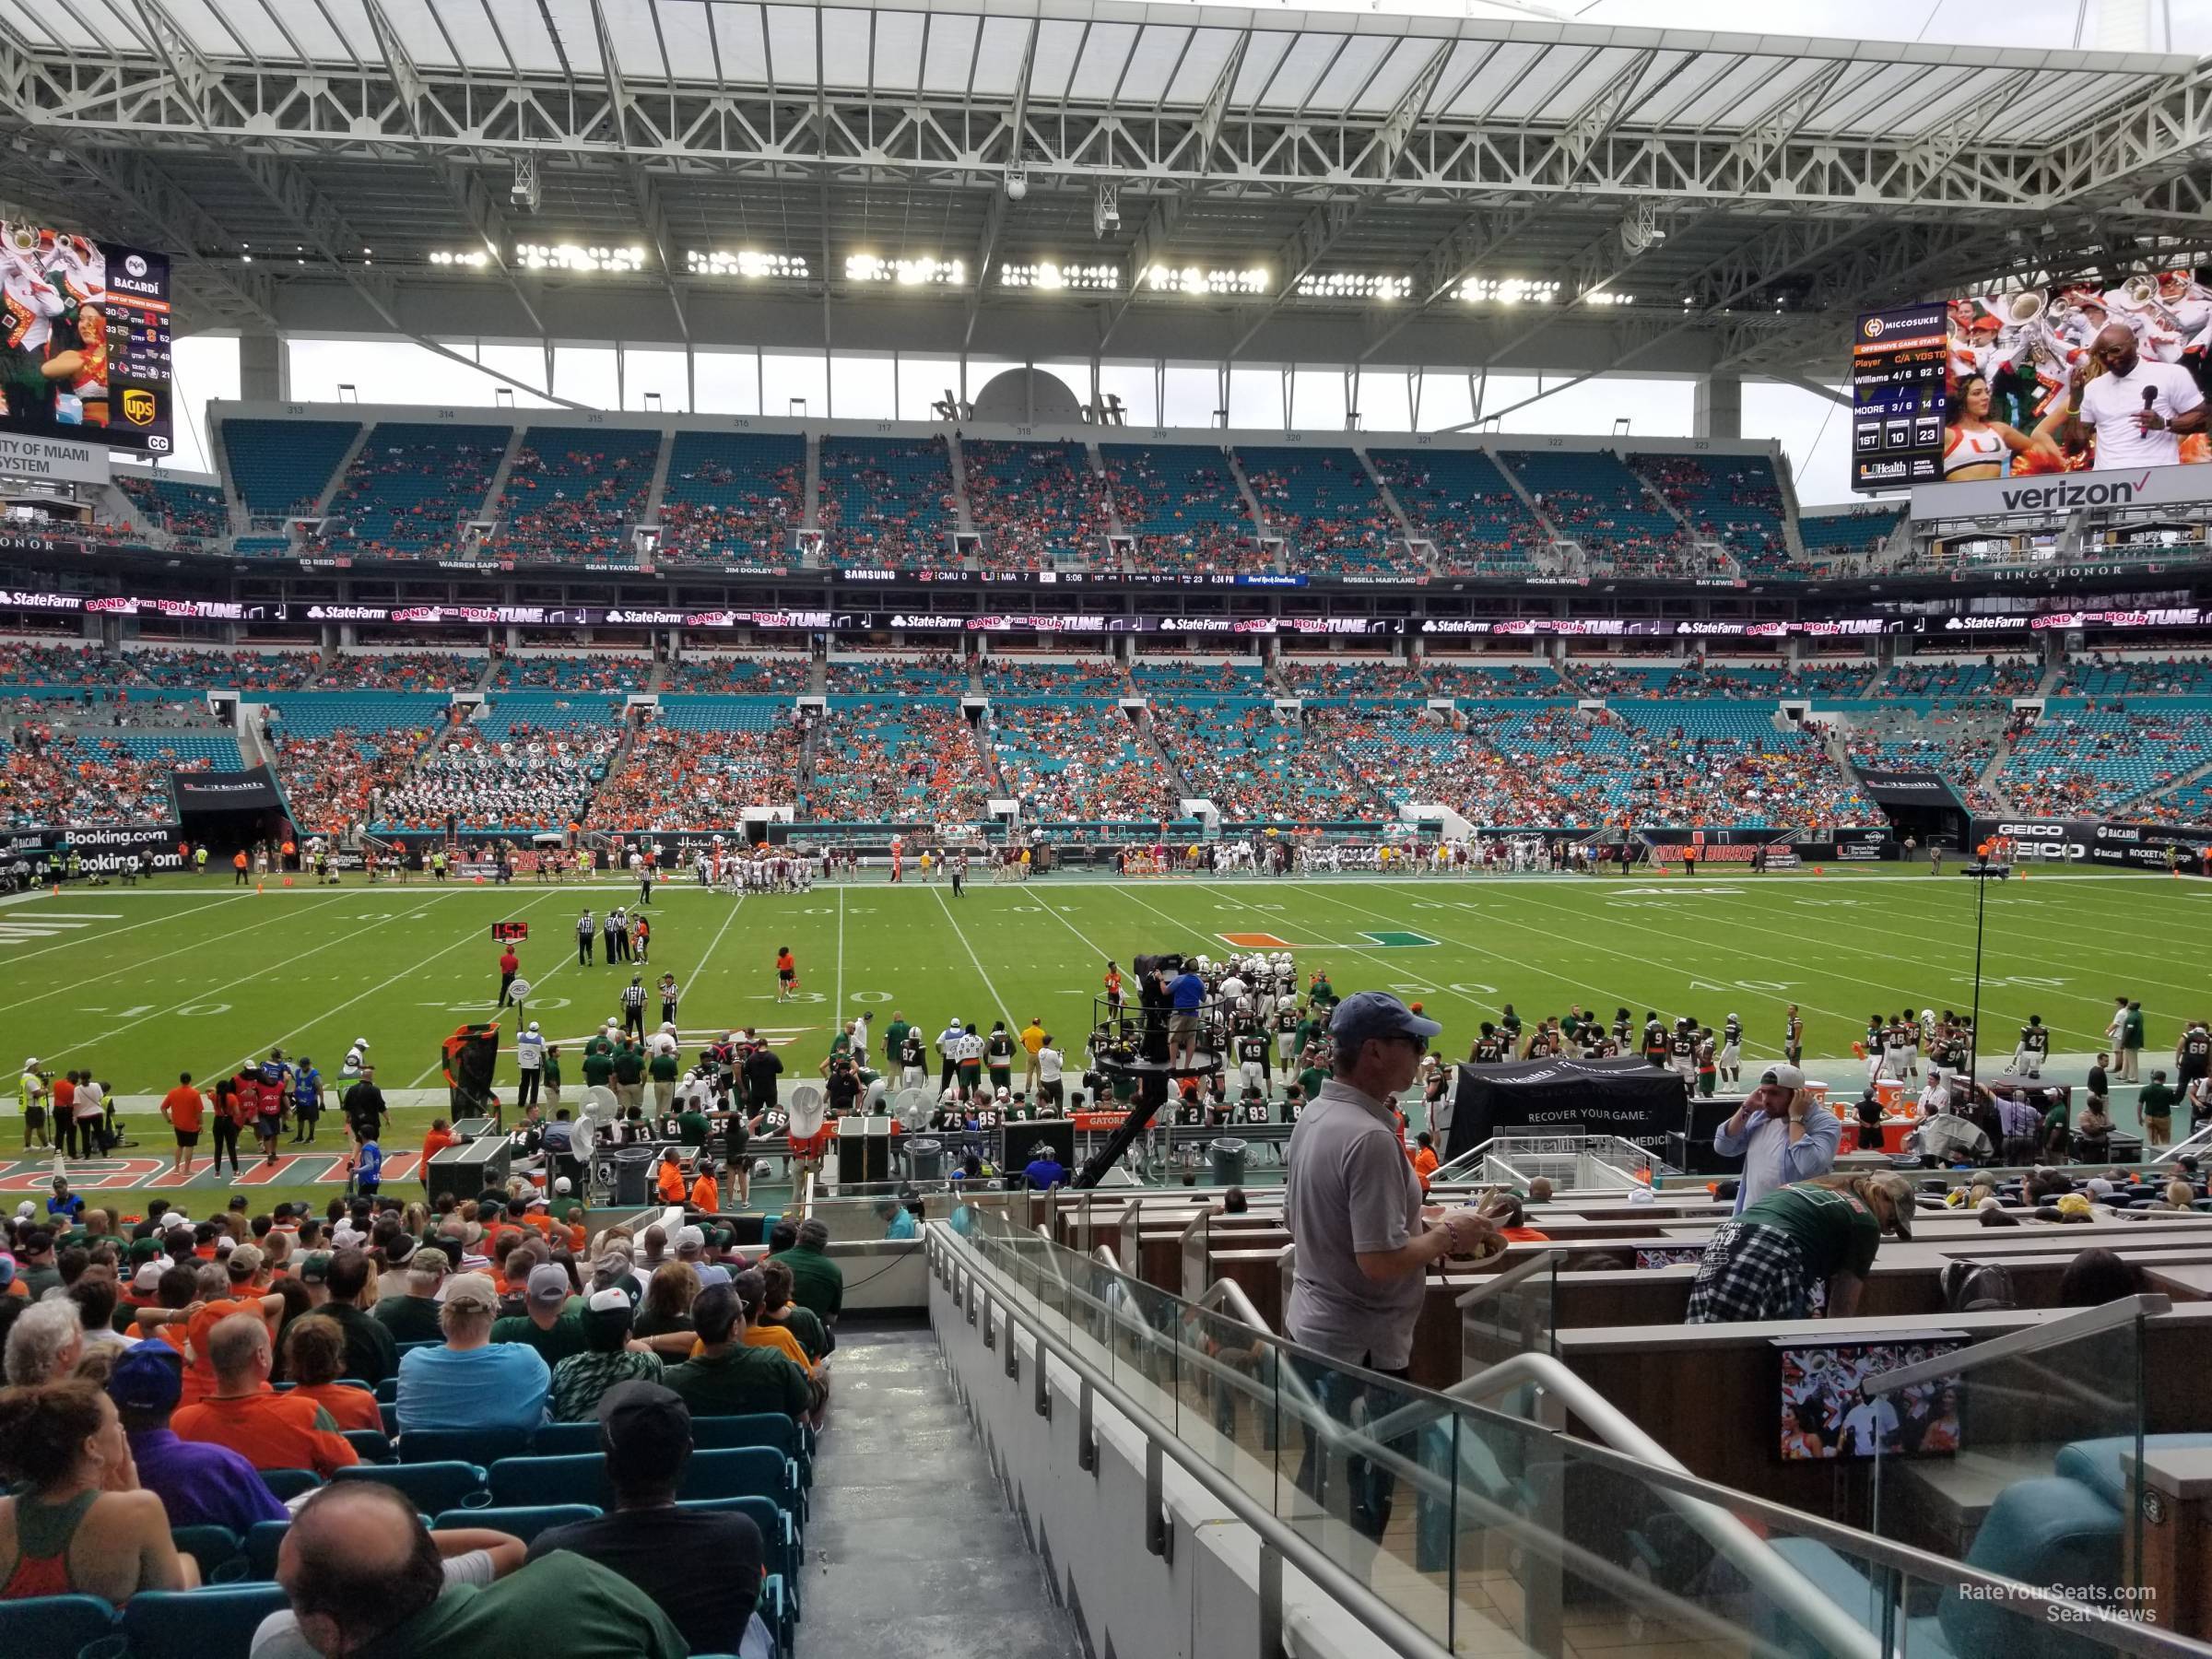 section 148, row 29w seat view  for football - hard rock stadium